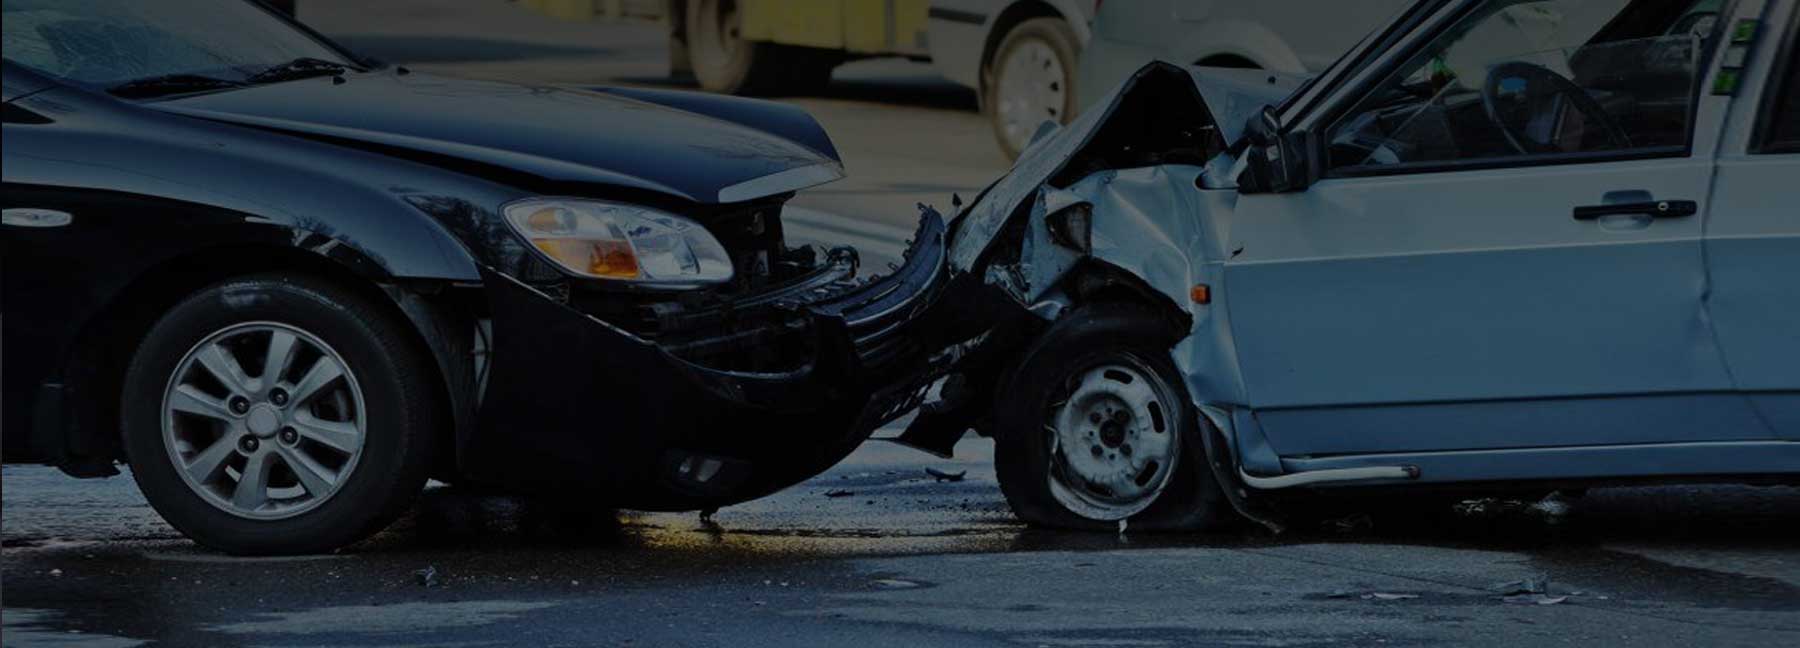 baltimore car accident lawyer